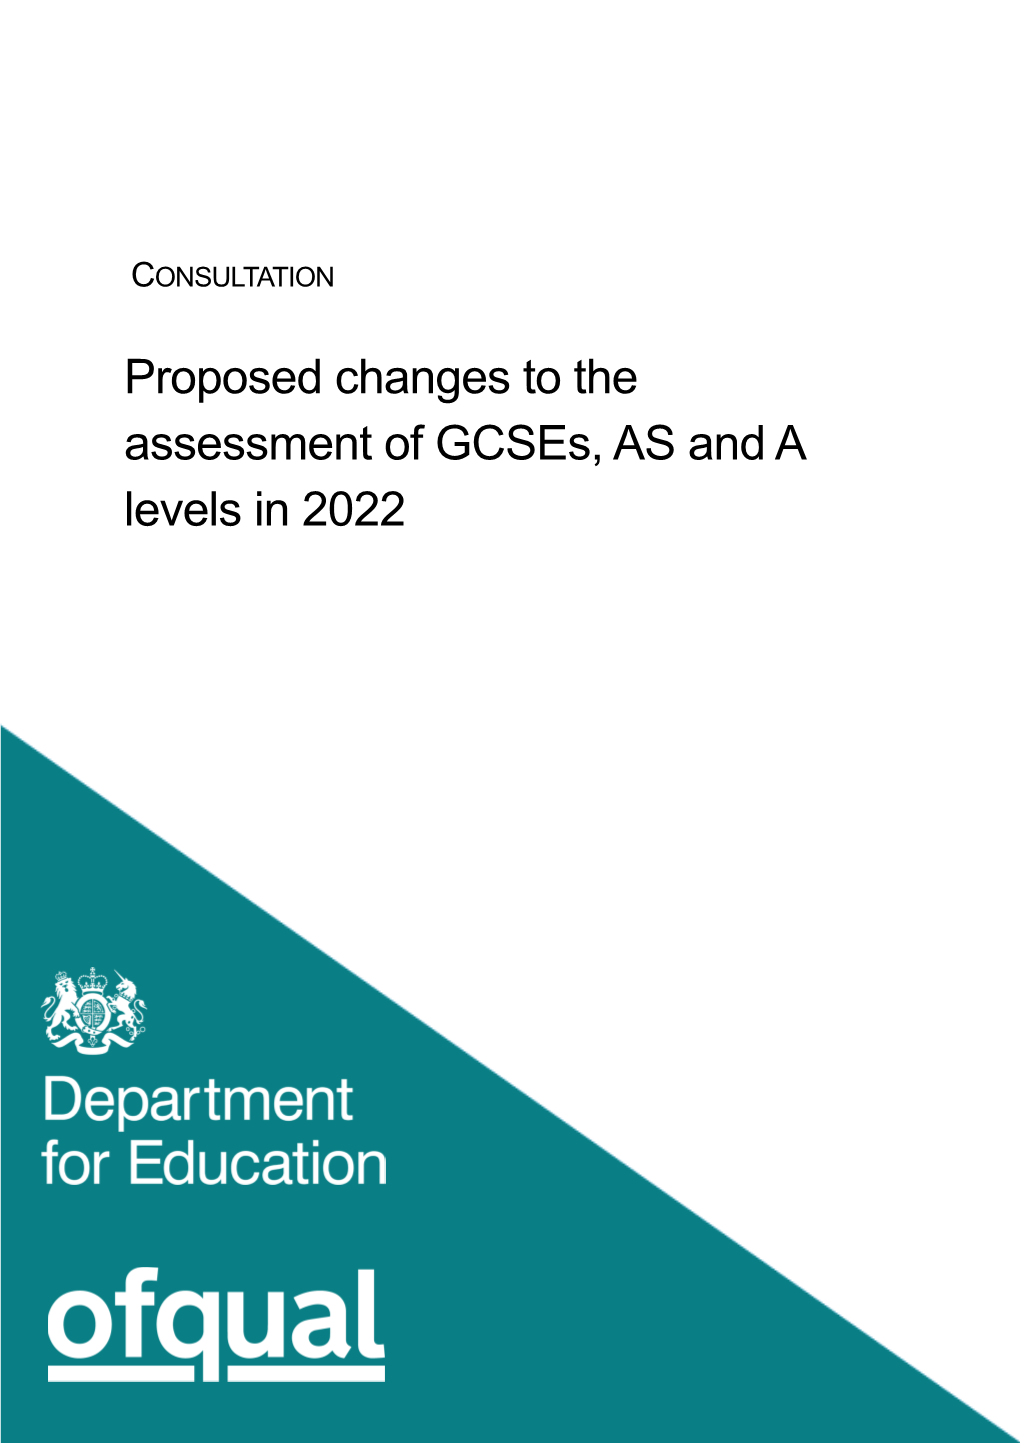 Proposed Changes to the Assessment of Gcses, AS and a Levels in 2022